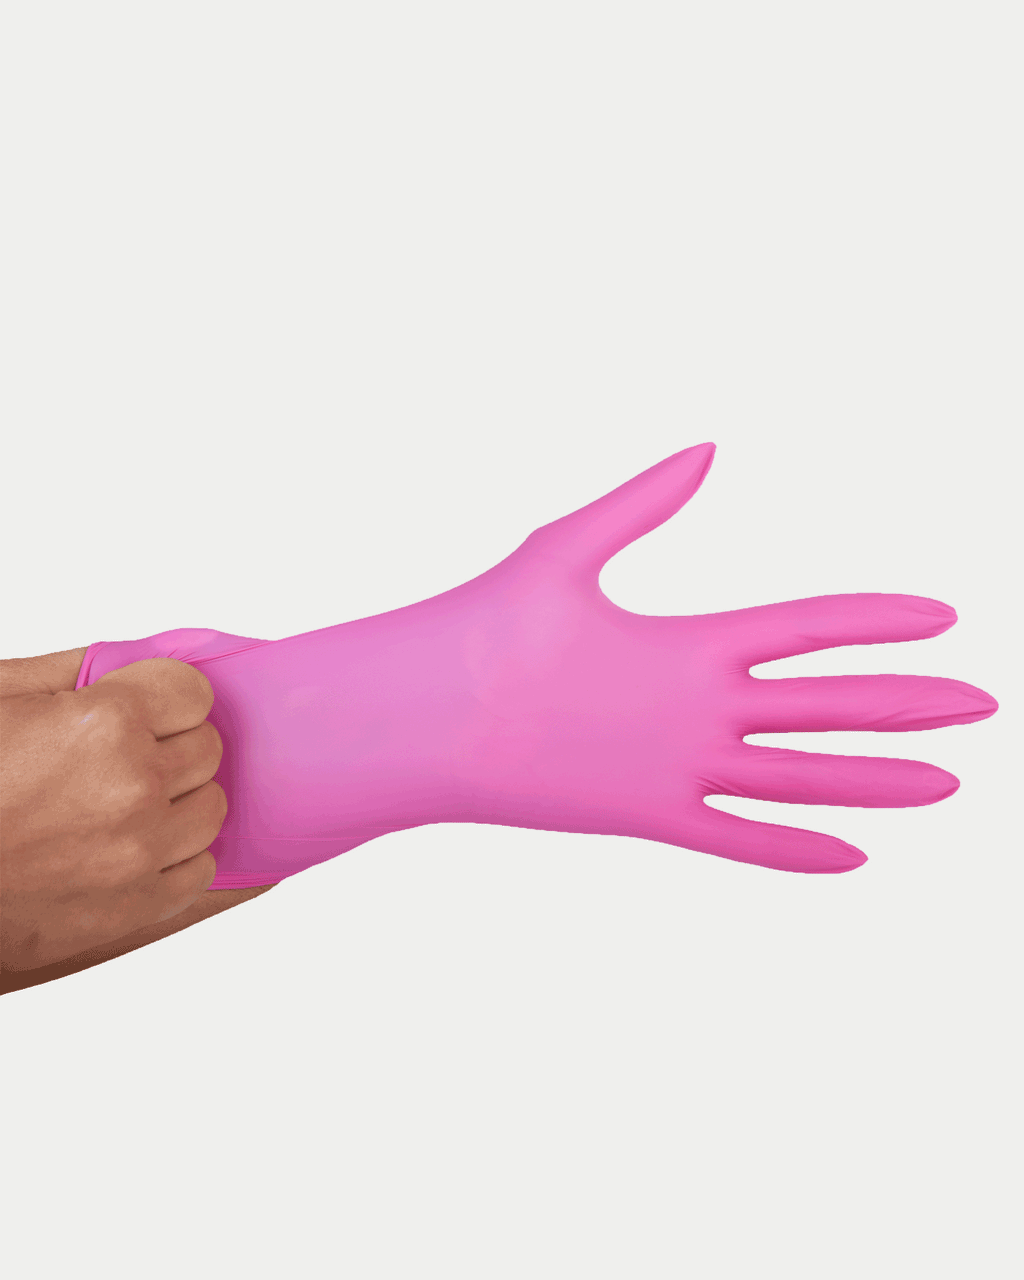 GIF,Nitrile glove, hair coloring glove, rubber glove, nitrile glove brands, hair salon gloves, gloves for salon use, nitrile gloves disposable, nitrile gloves non medical, nitrile glove powder free